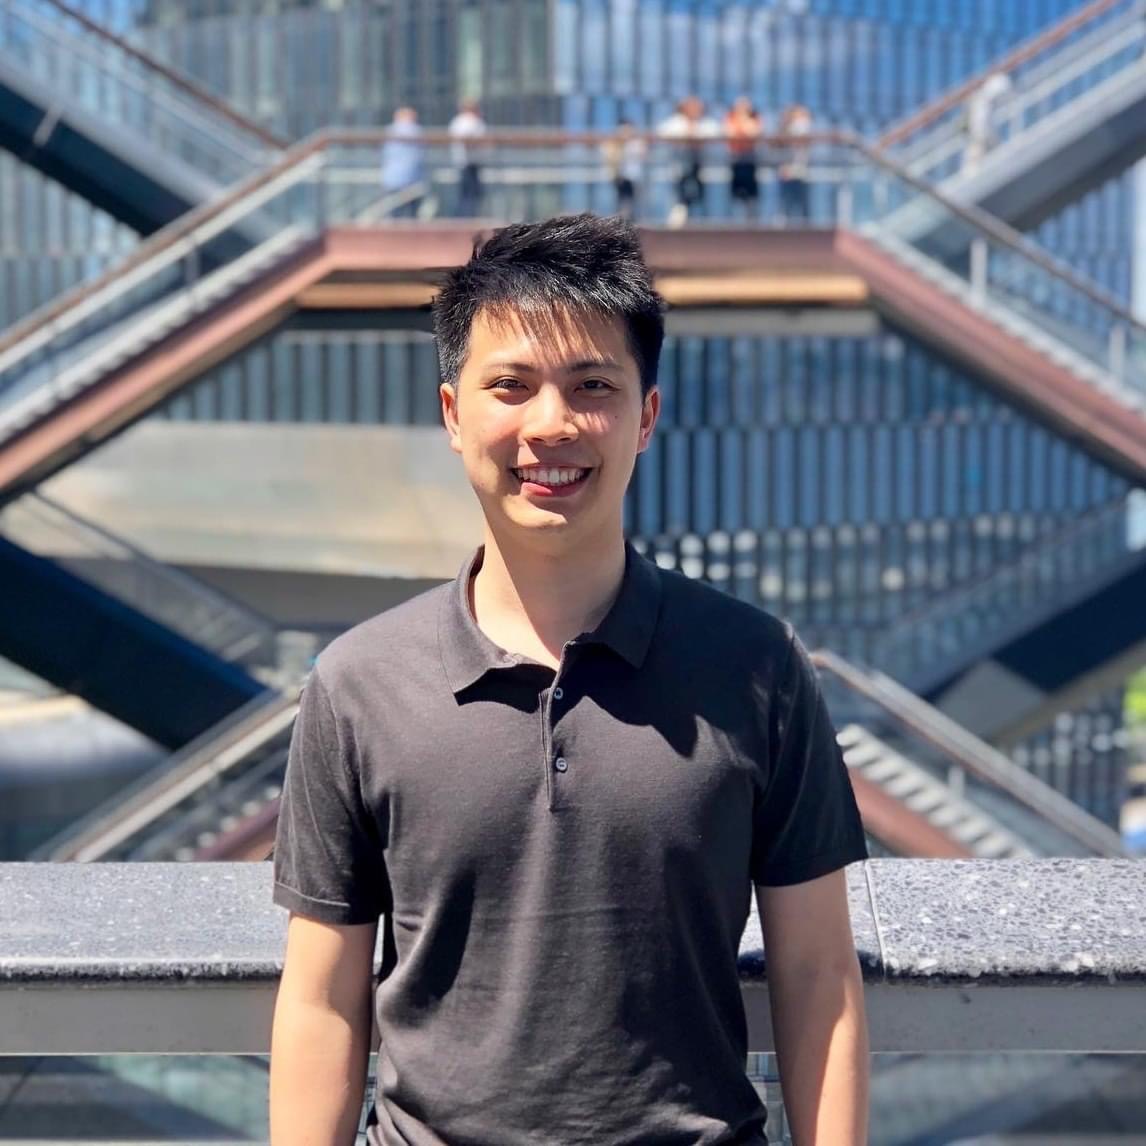 Reggie is Taiwanese-Canadian, born in Taichung and grew up in Vancouver. He is an architect and product manager at a construction tech company. He enjoys playing tennis, hiking, swimming, snowboarding, and ice hockey so don’t hesitate to reach out to him if you want to get a game going.